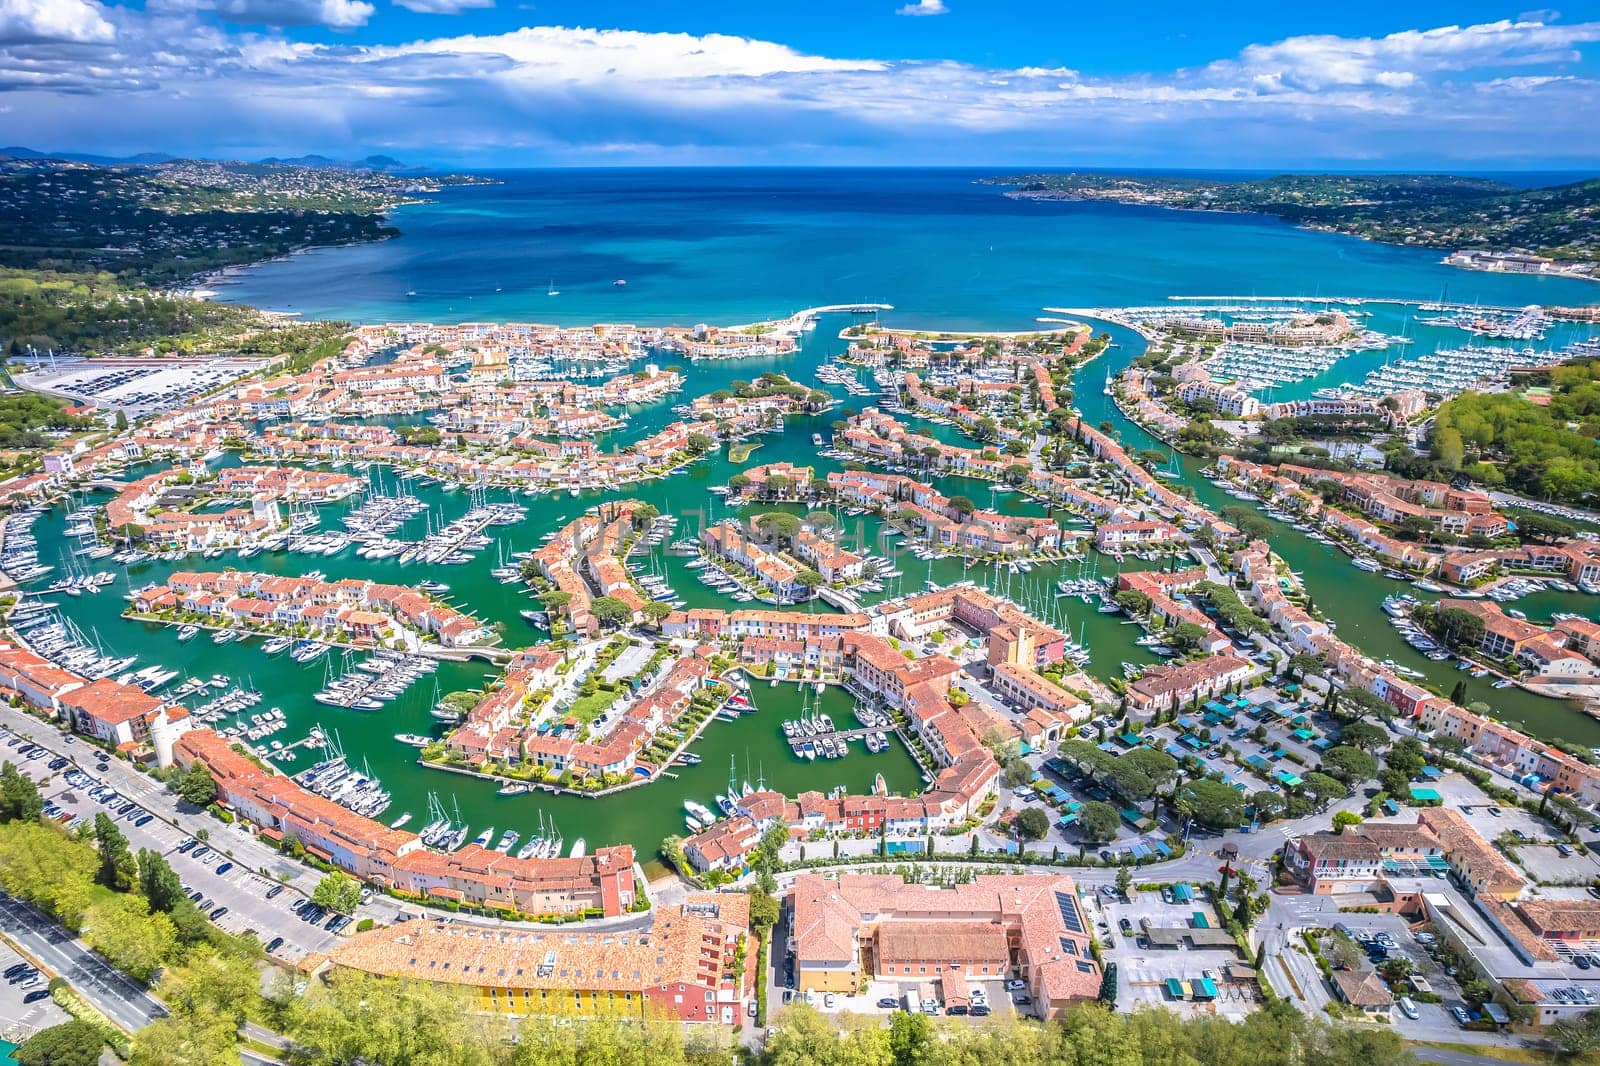 Scenic Port Grimaud yachting village marina aerial view by xbrchx